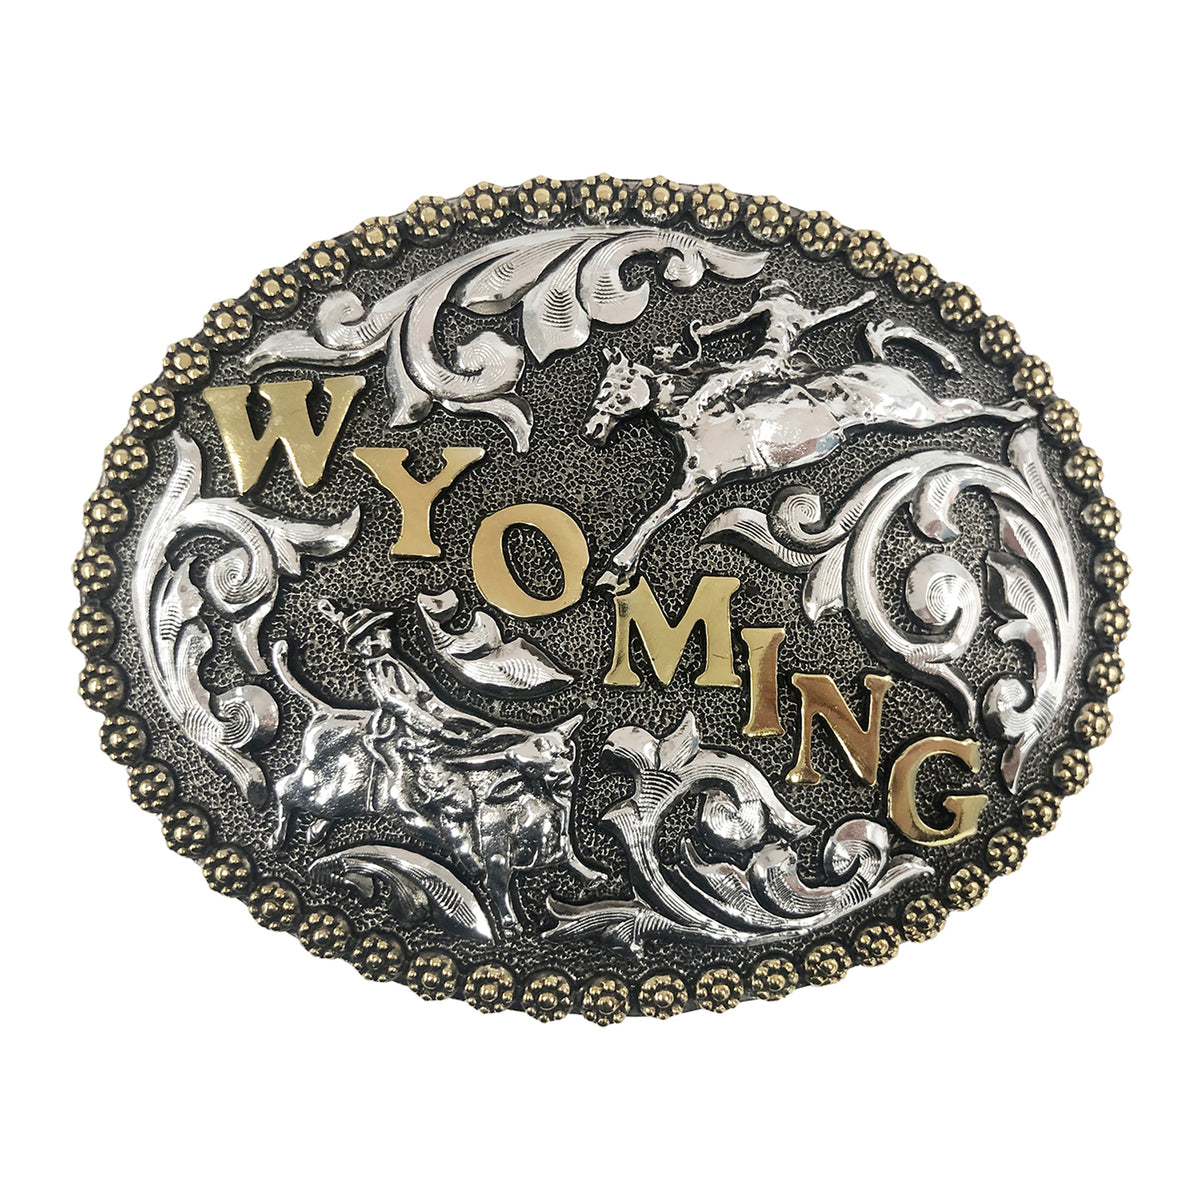 Wyoming with Bronc &amp; Bull Riders Buckle